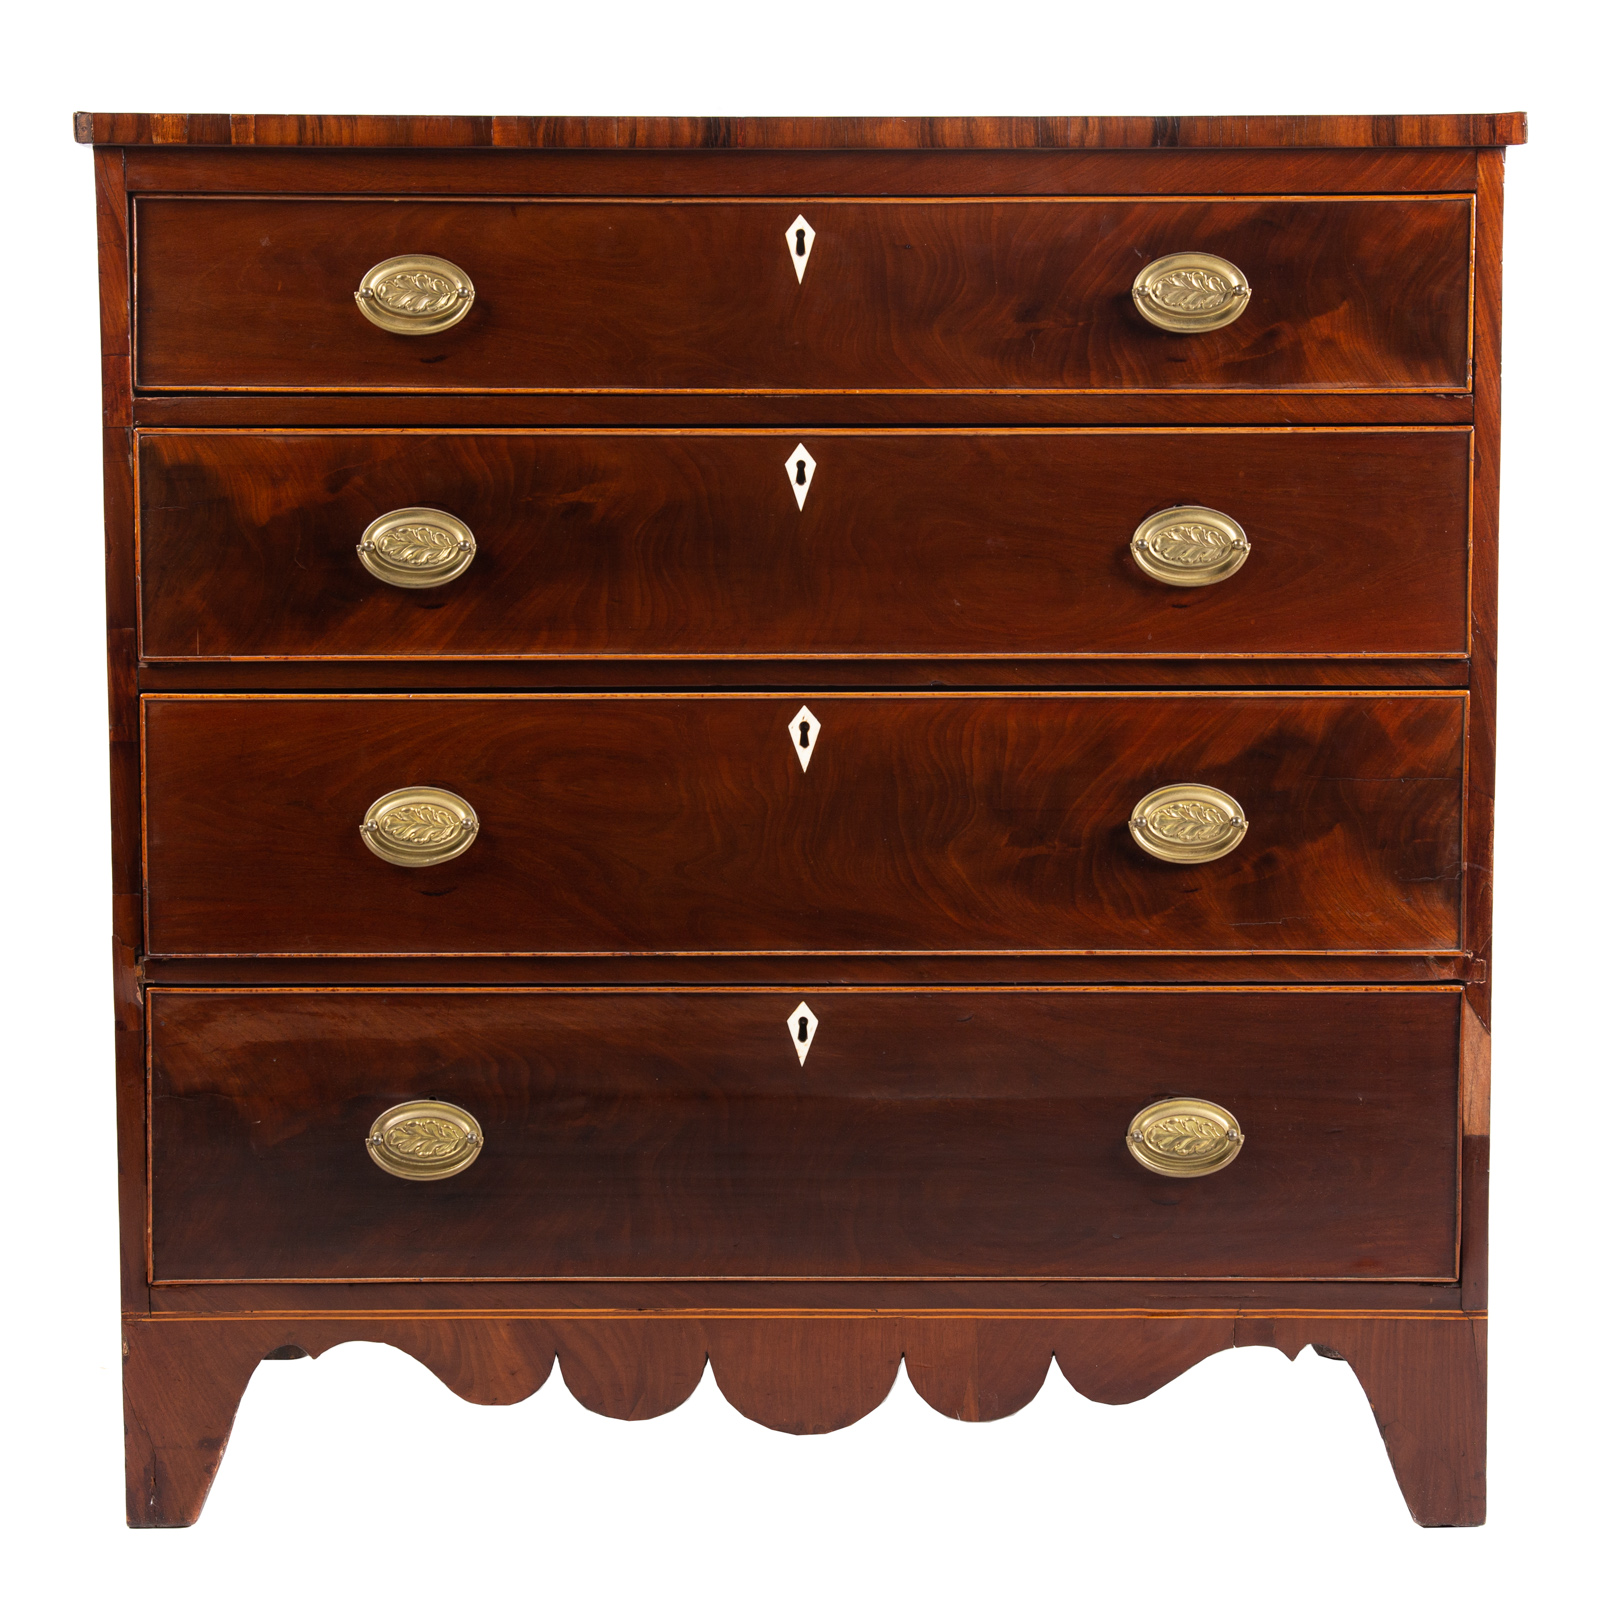 FEDERAL MAHOGANY CHEST OF DRAWERS 2e9097